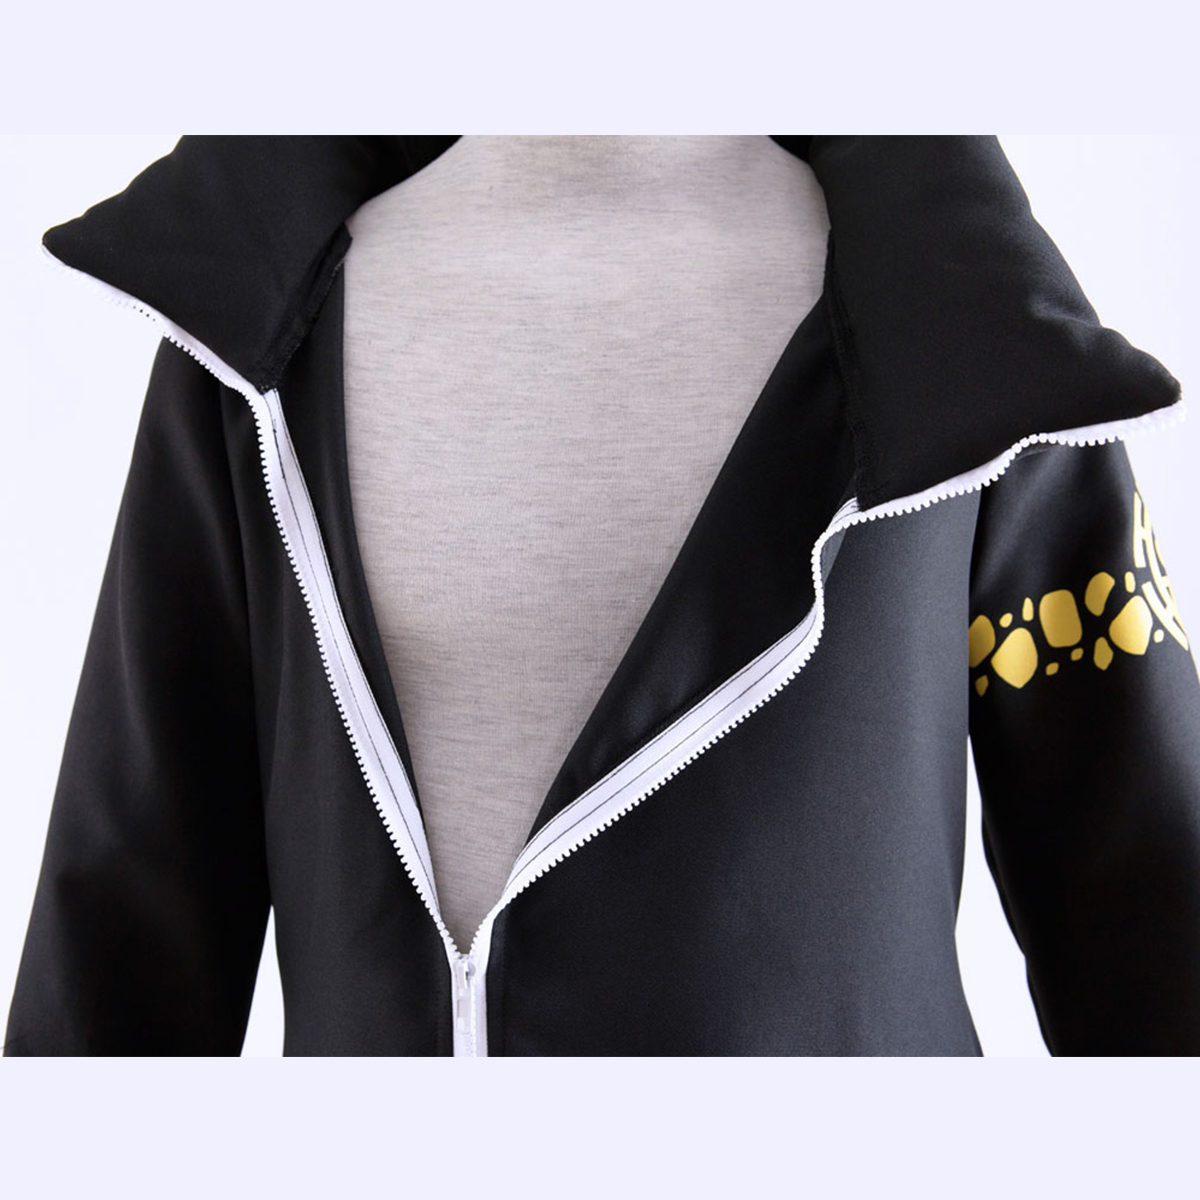 One Piece Trafalgar Law 2 Anime Cosplay Costumes Outfit